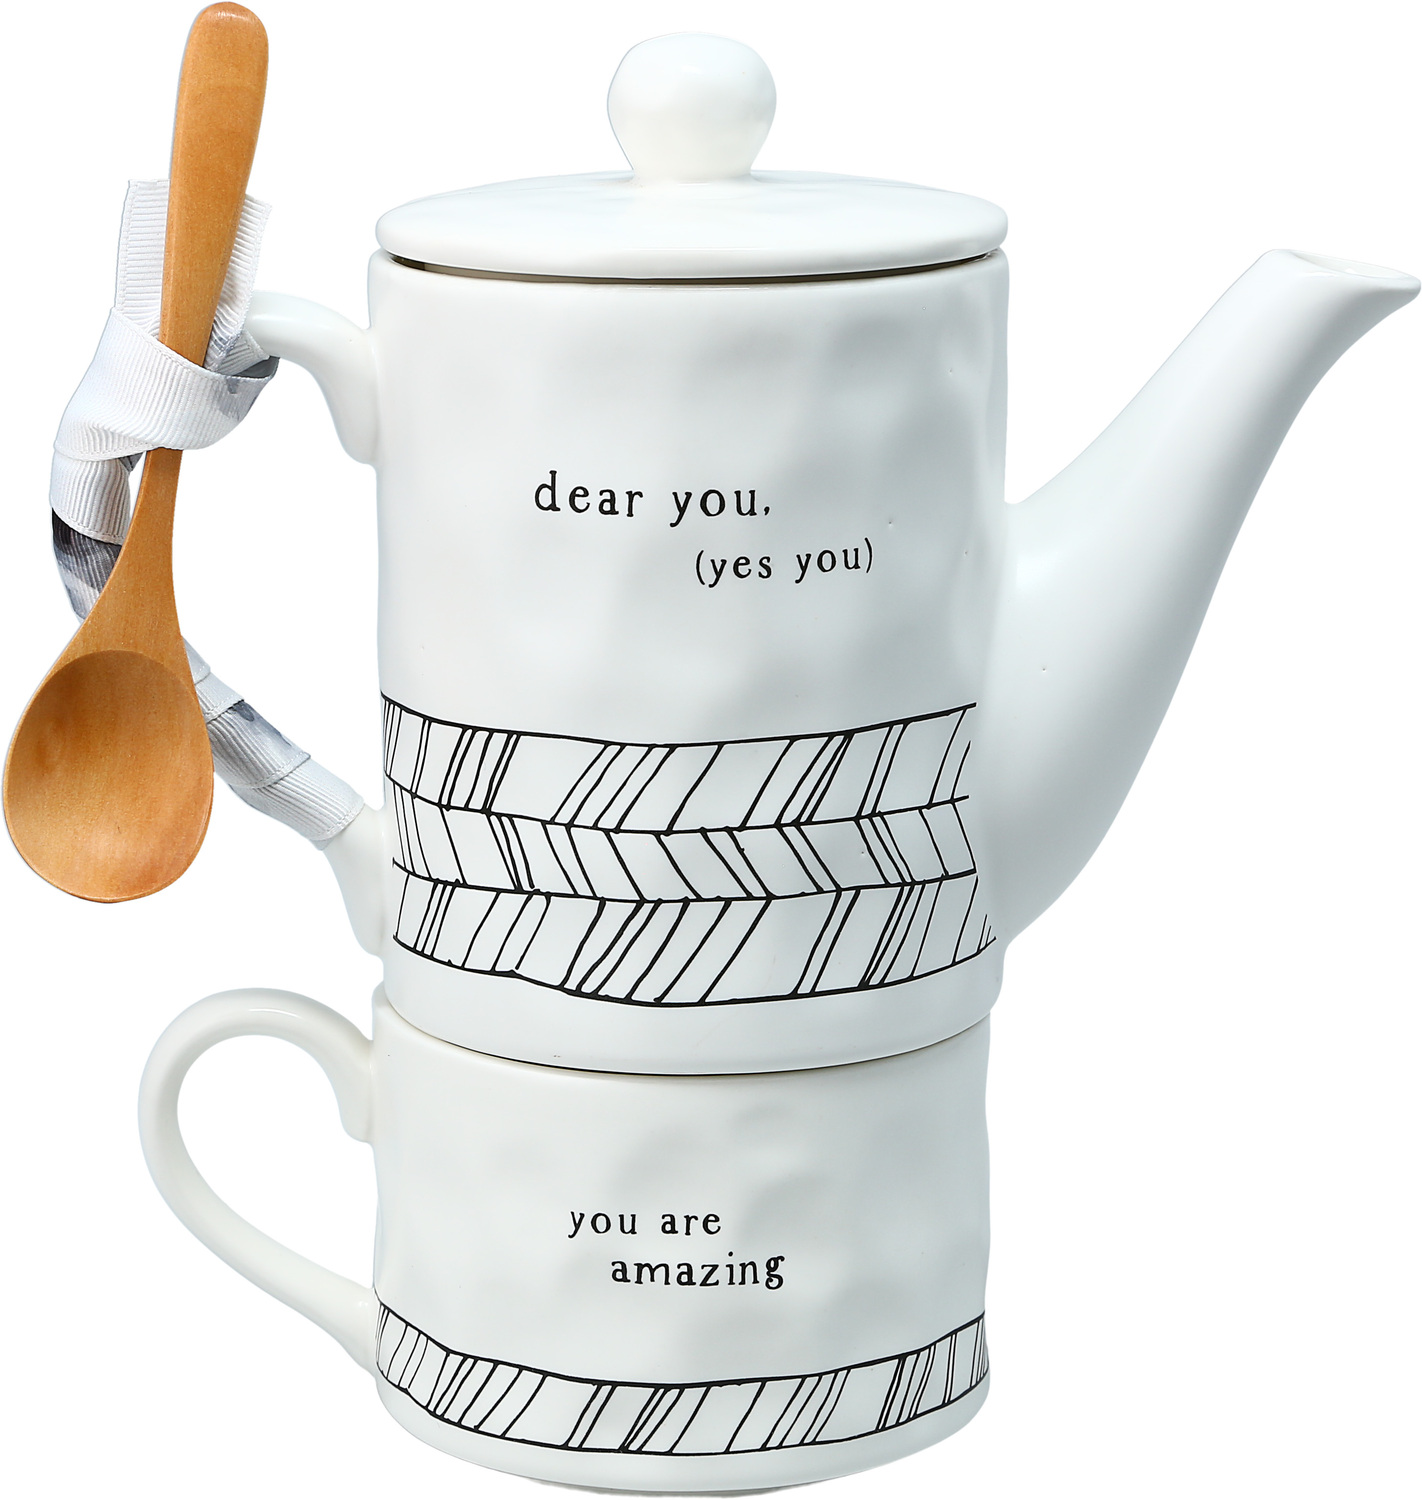 Dear You by Celebrating You - Dear You - Tea for One